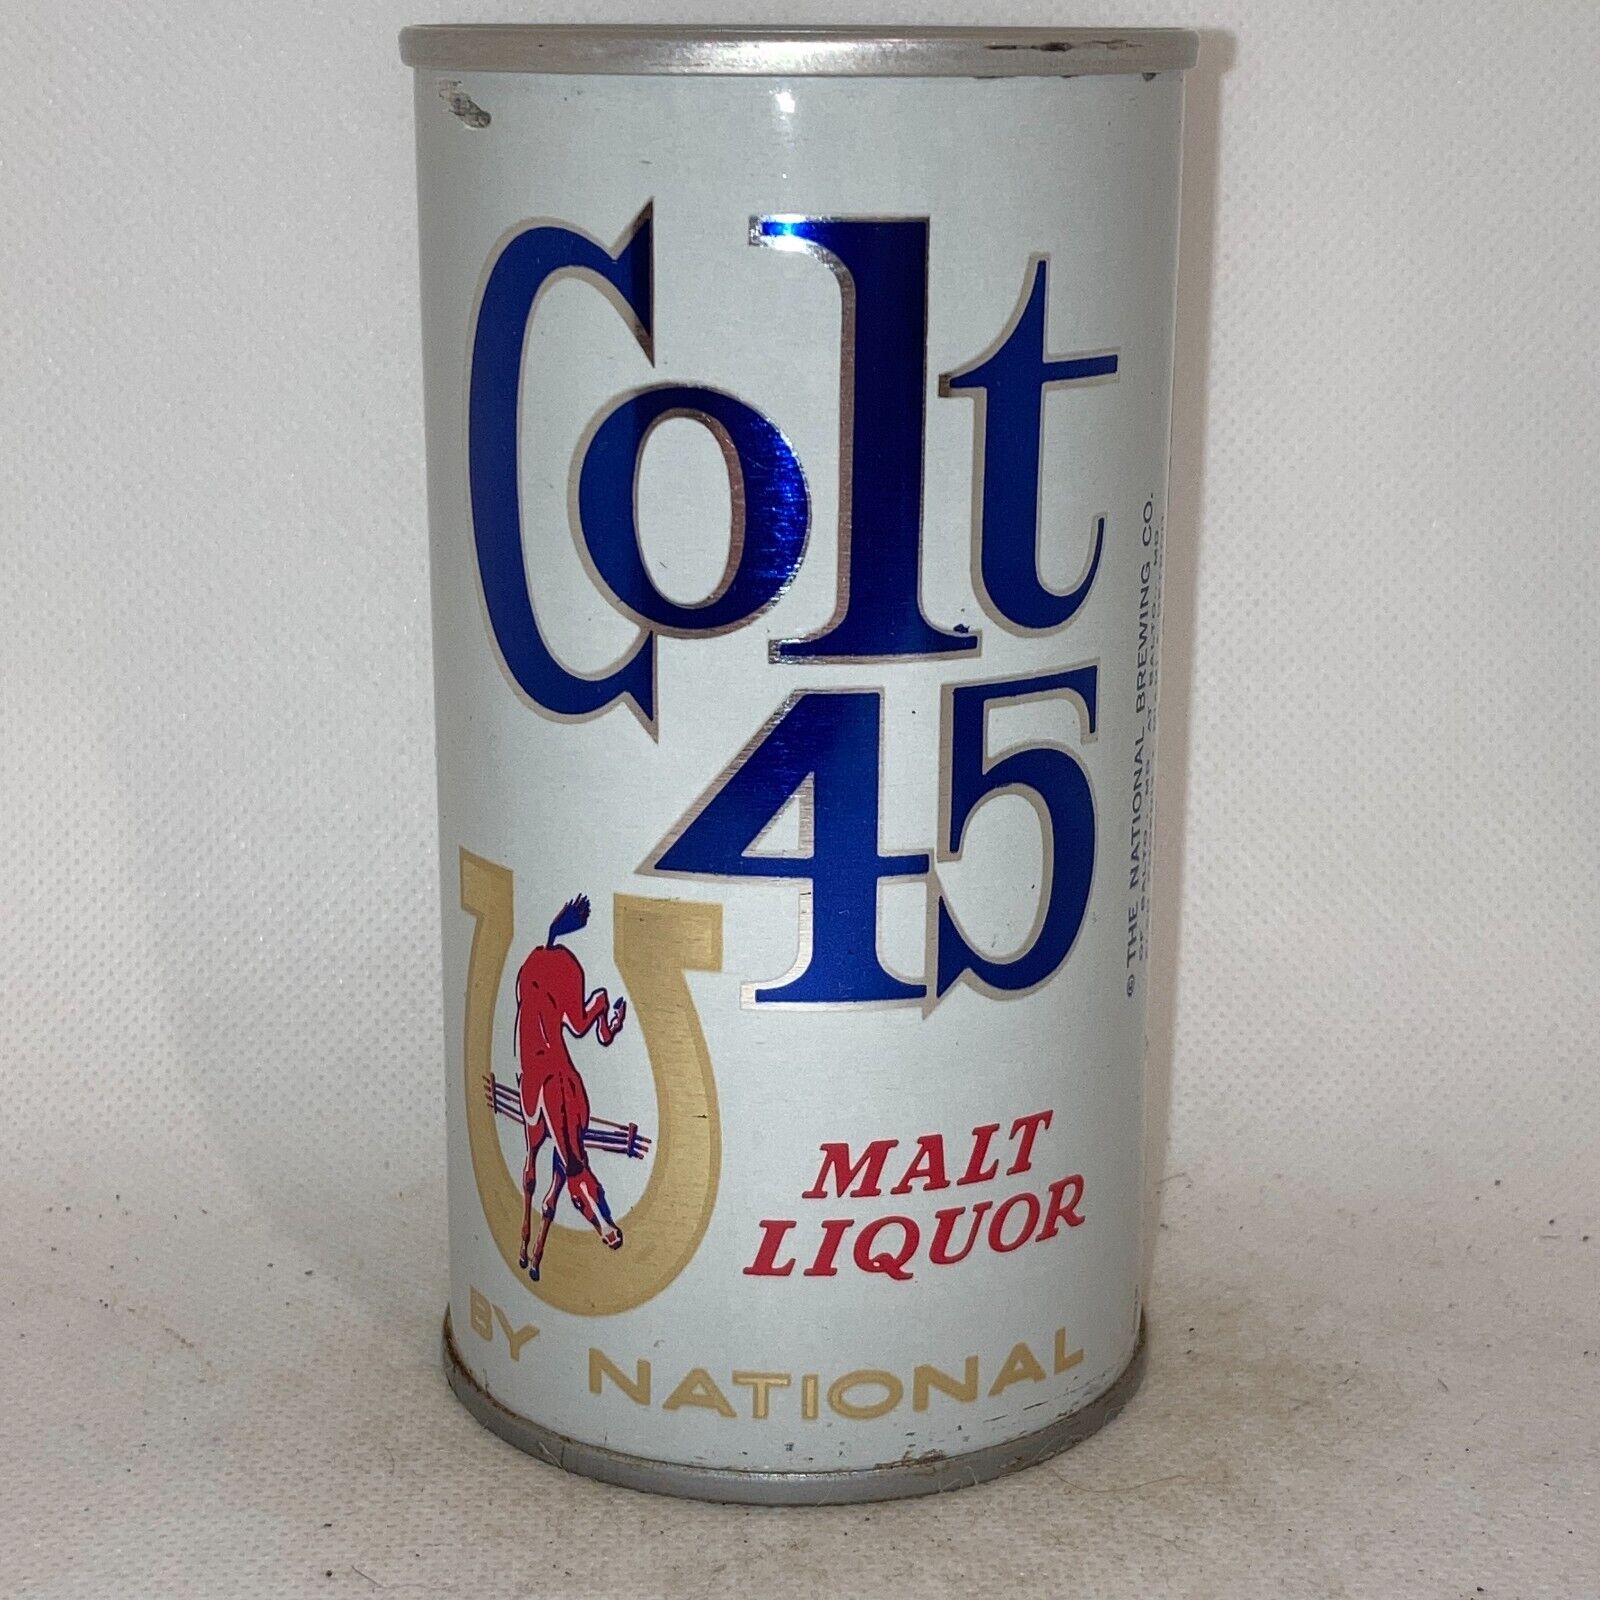 Colt 45 beer can, bottom opened